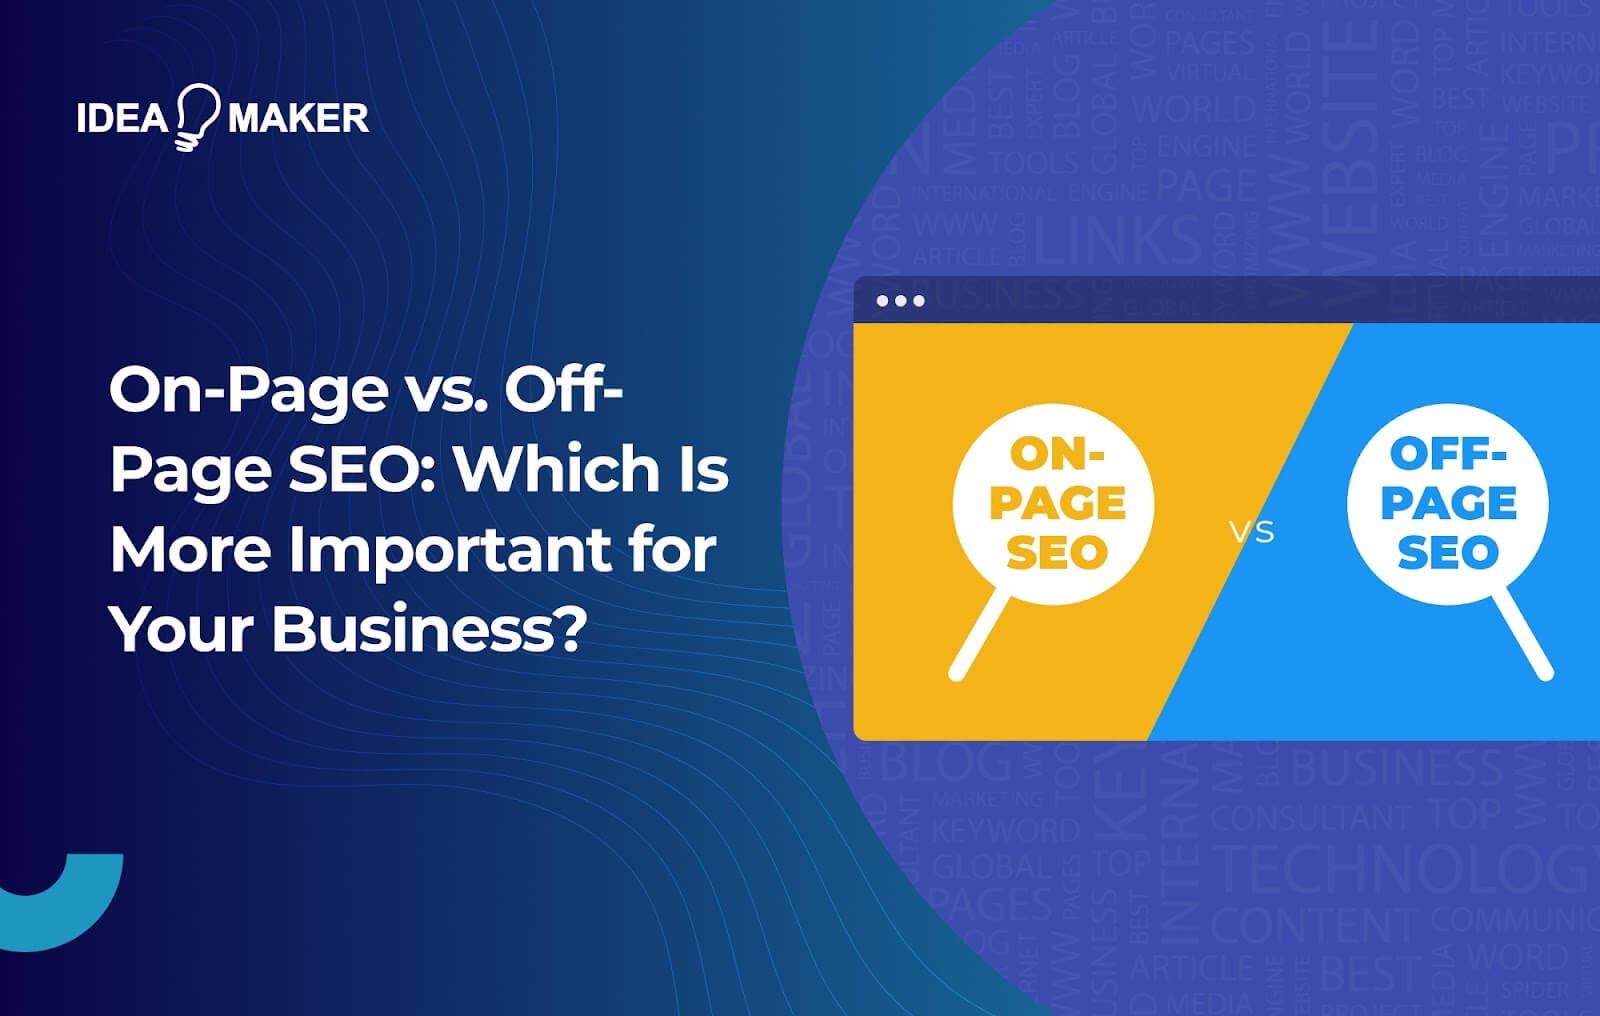 Ideamaker - On-Page vs Off-Page SEO Which Is More Important for Your Business_